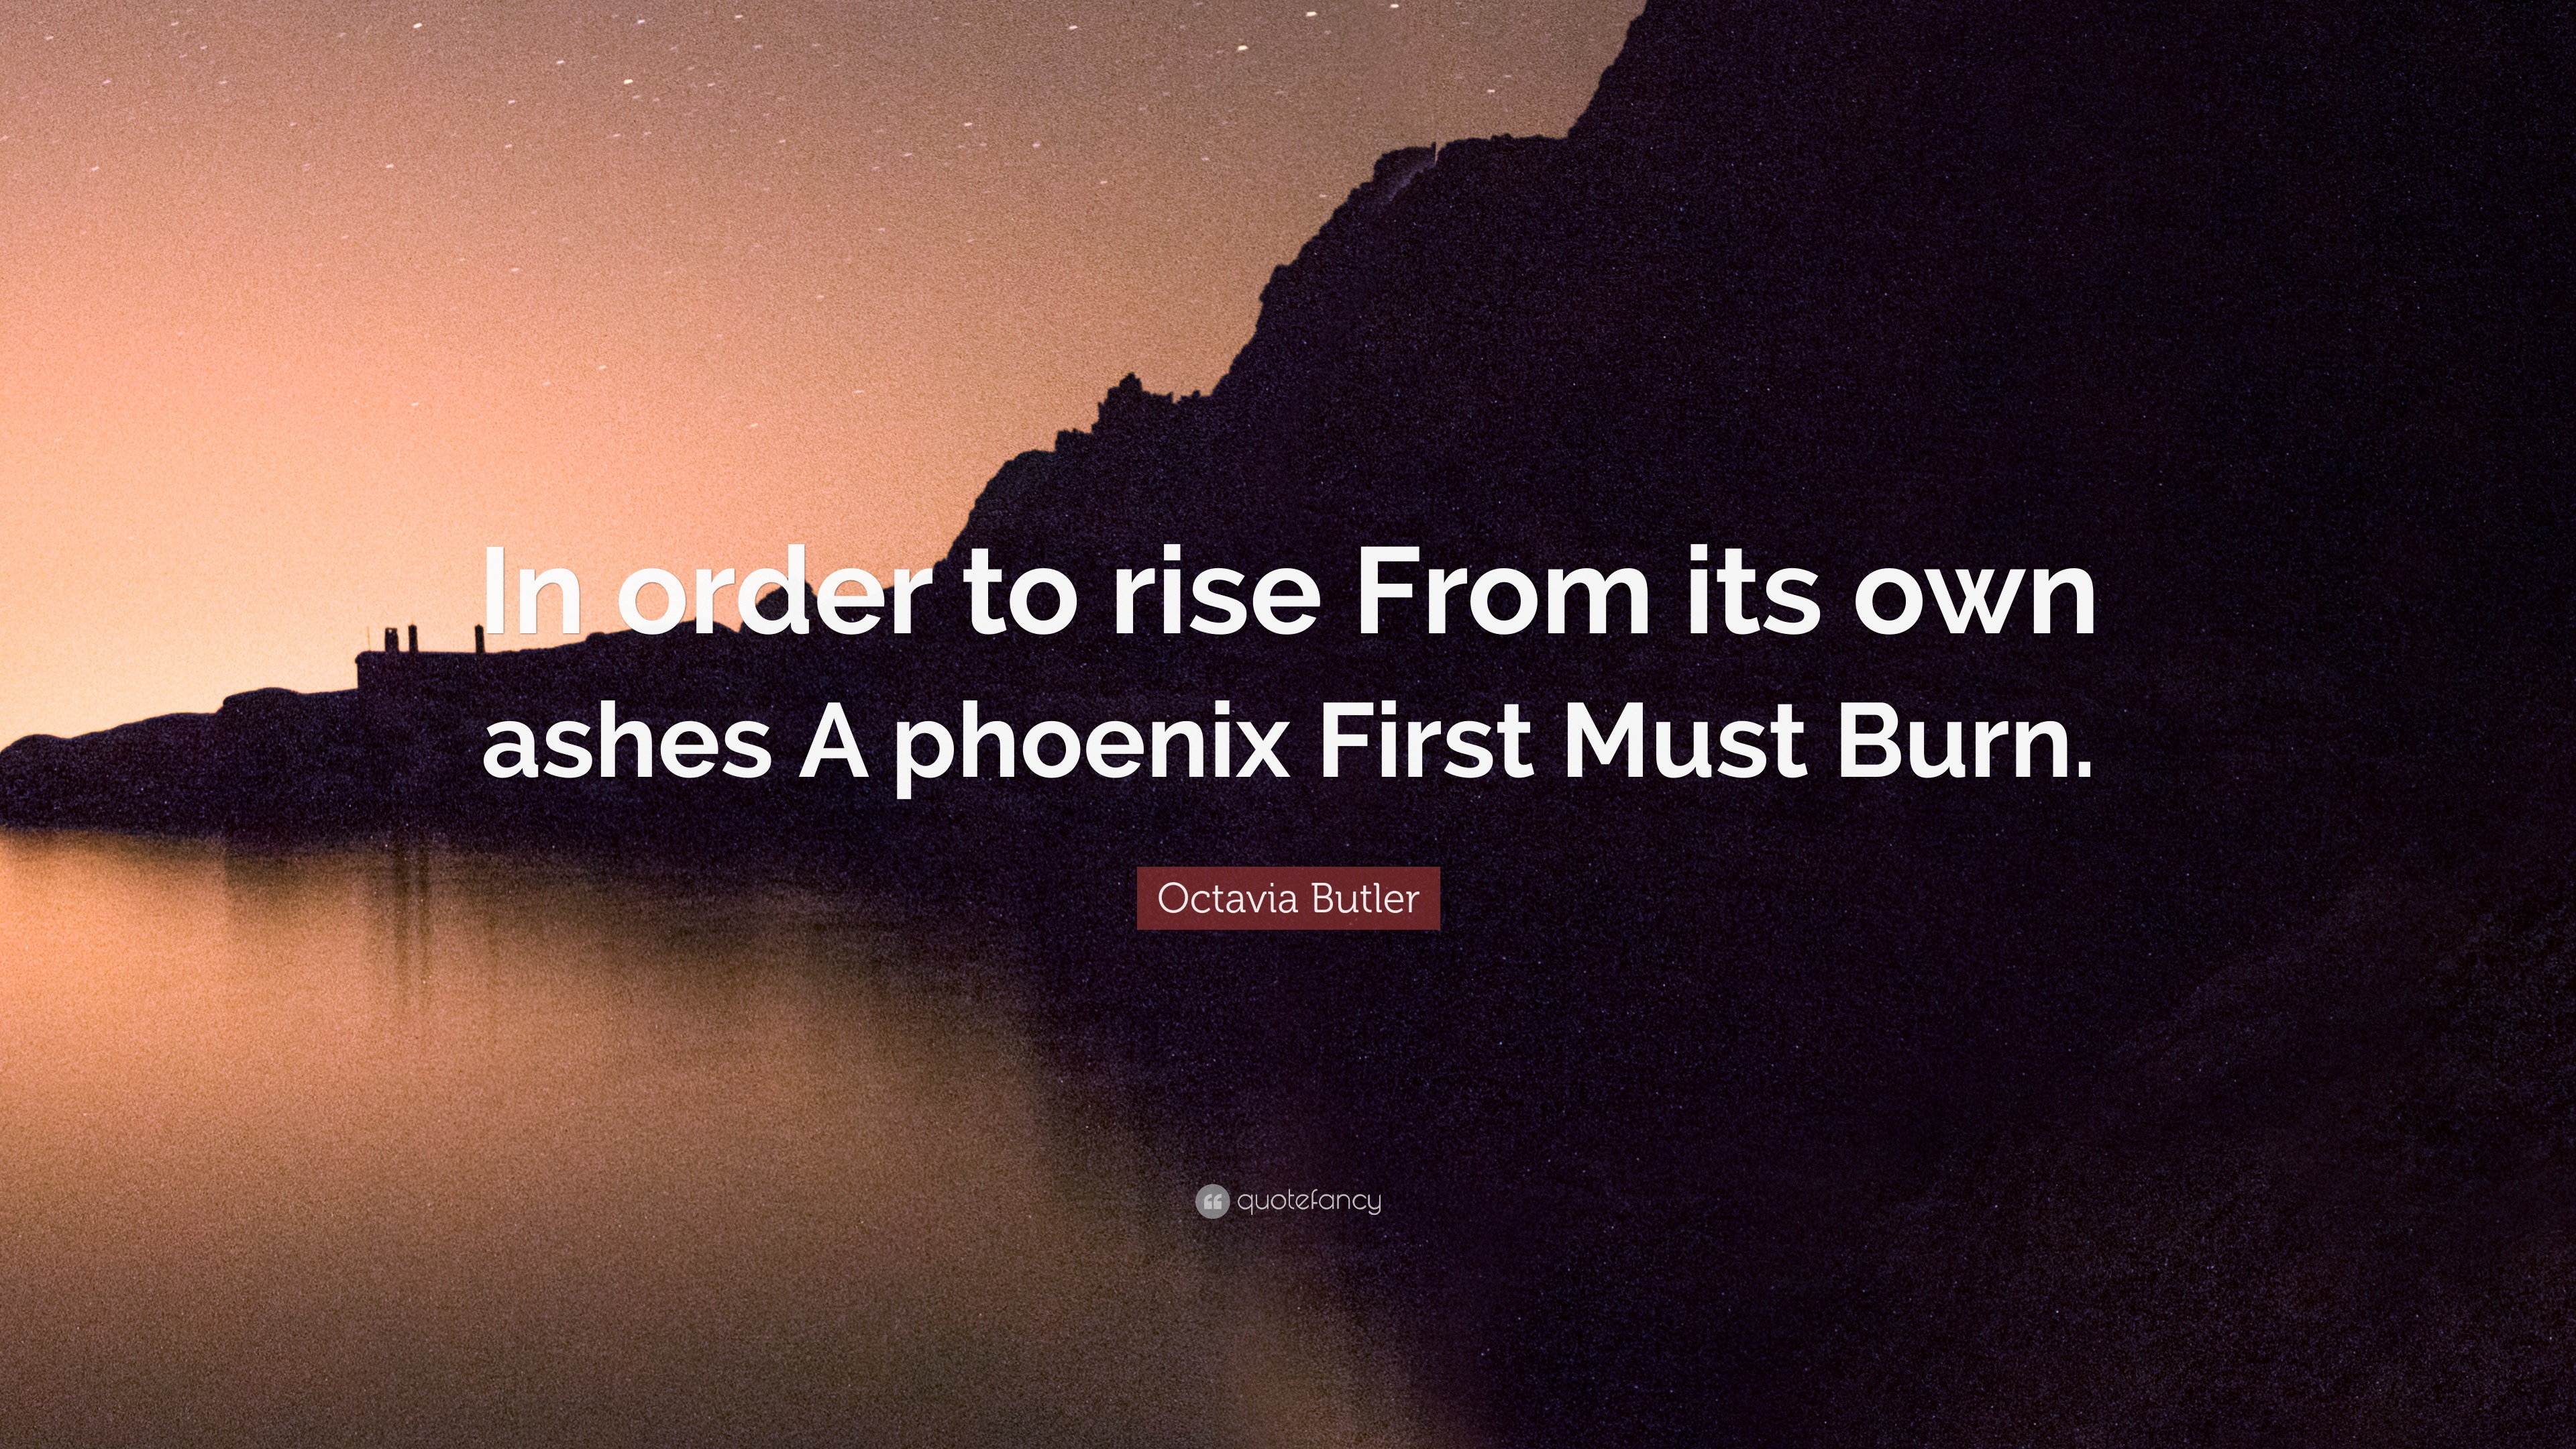 Octavia Butler Quote In Order To Rise From Its Own Ashes A Phoenix First Must Burn 11 Wallpapers Quotefancy